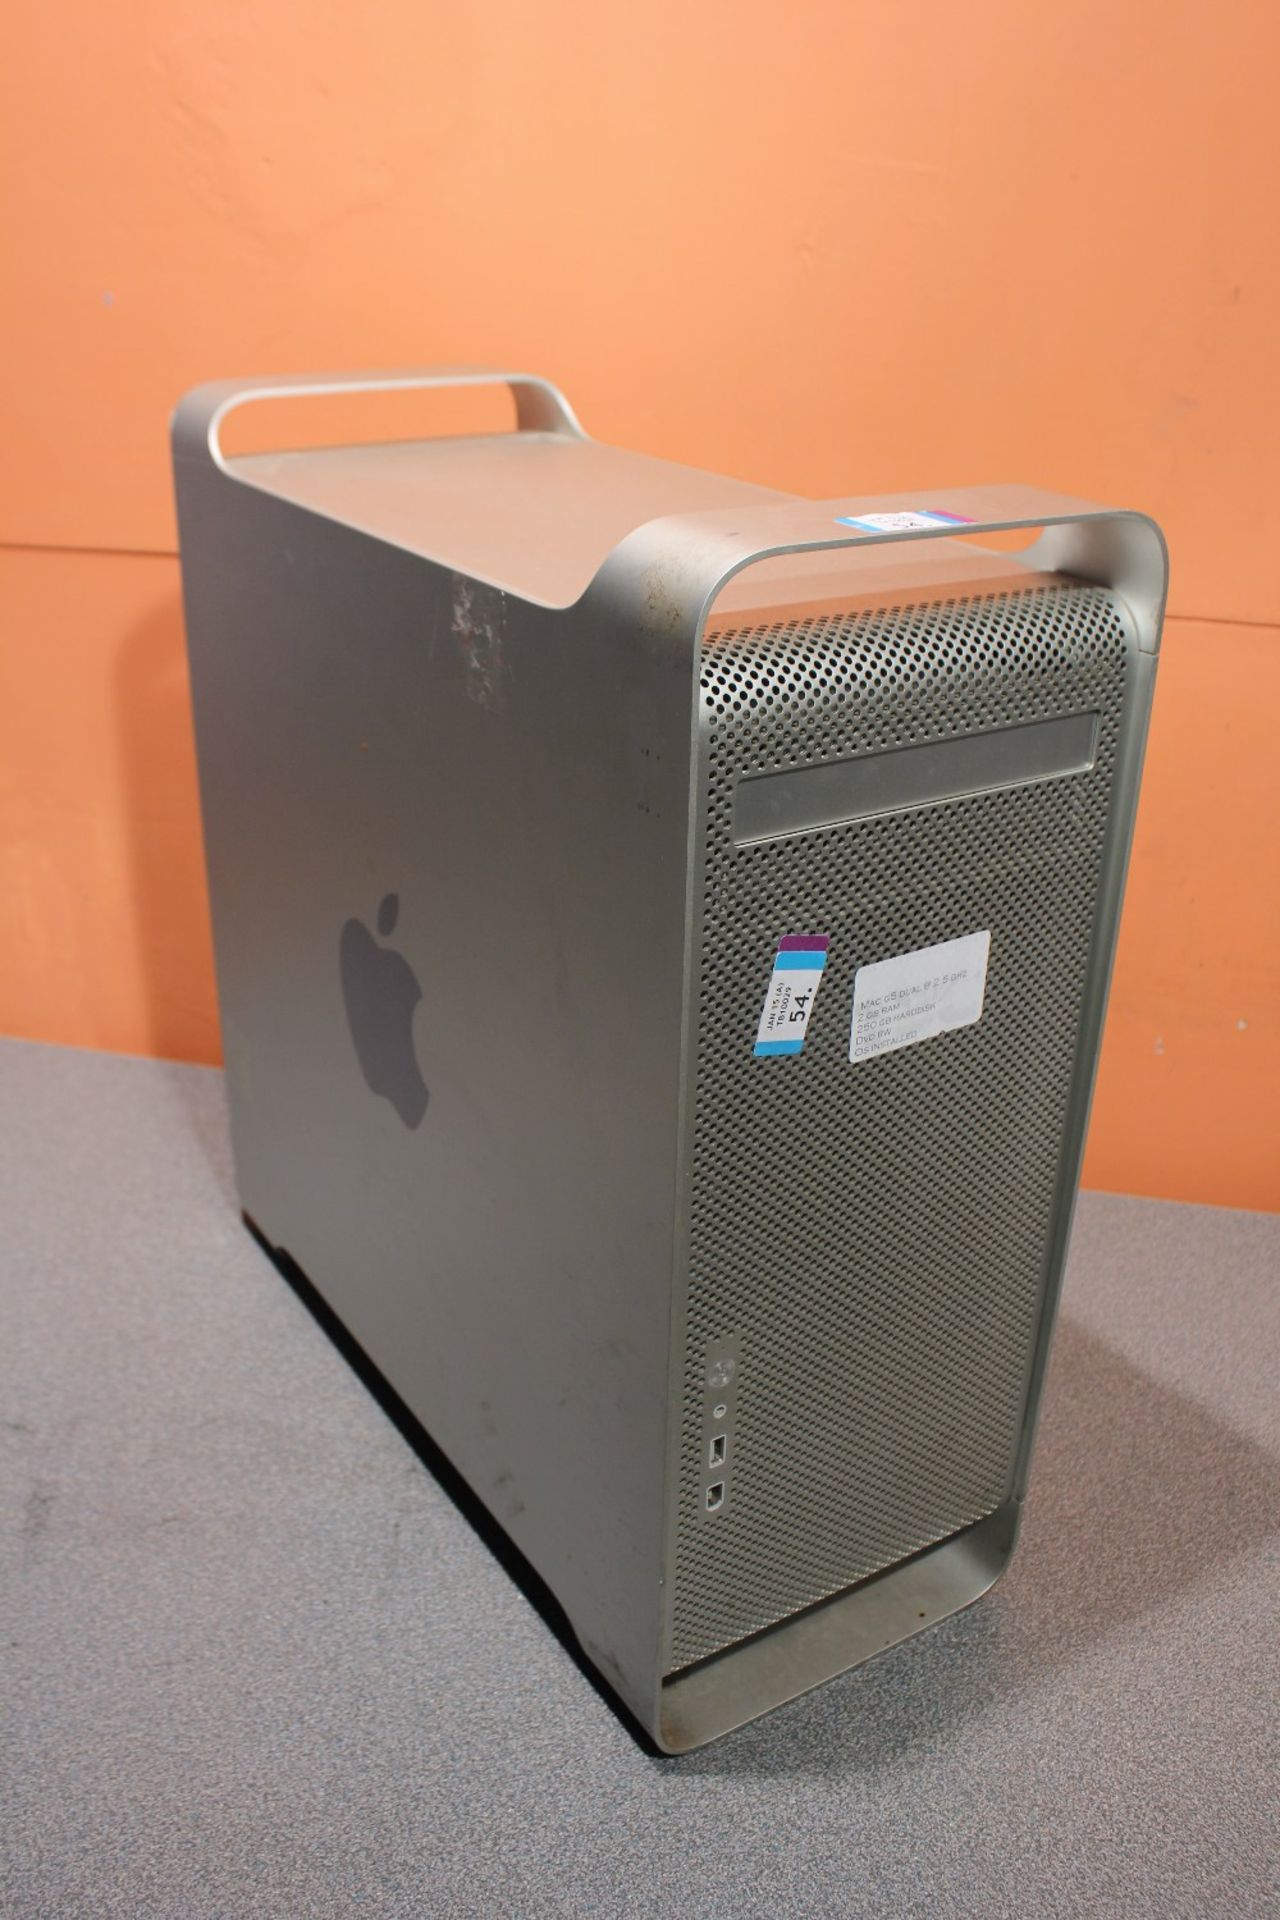 APPLE Tower G5 Dual @ 2.5Ghz - 2GB Ram - 250GB HDD - DVD-RW - OSX installed - Tested and Working